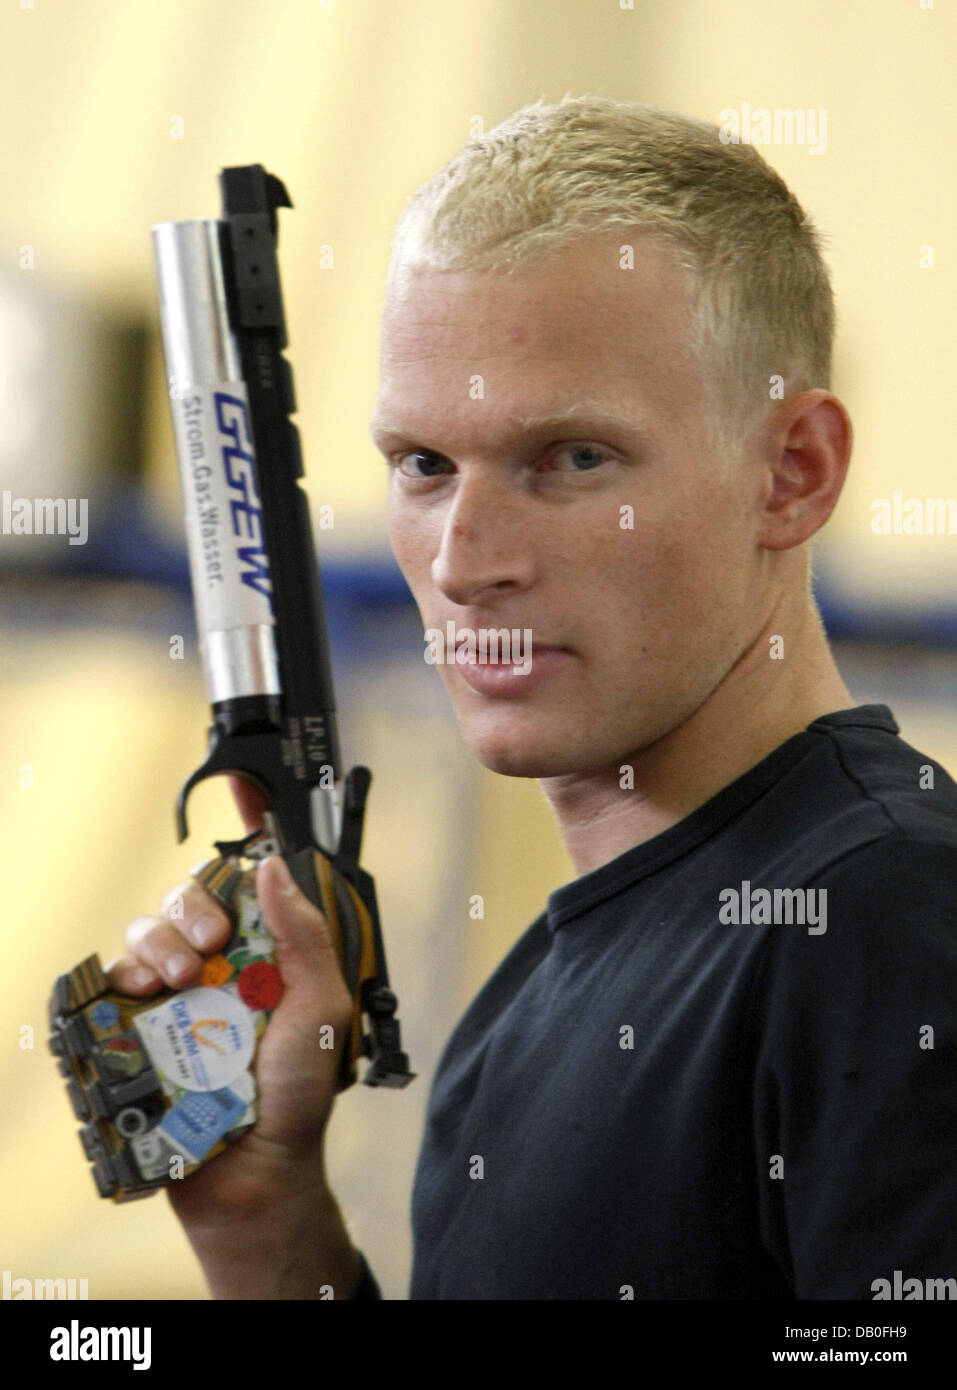 German Steffen Gebhard poses with an air gun during the World Championships in Modern Pentathlon in Berlin, Germany, 19 August 2007. About 300 athletes compete at the World Championships in Modern Pentathlon until 21 August. Photo: Soeren Stache Stock Photo